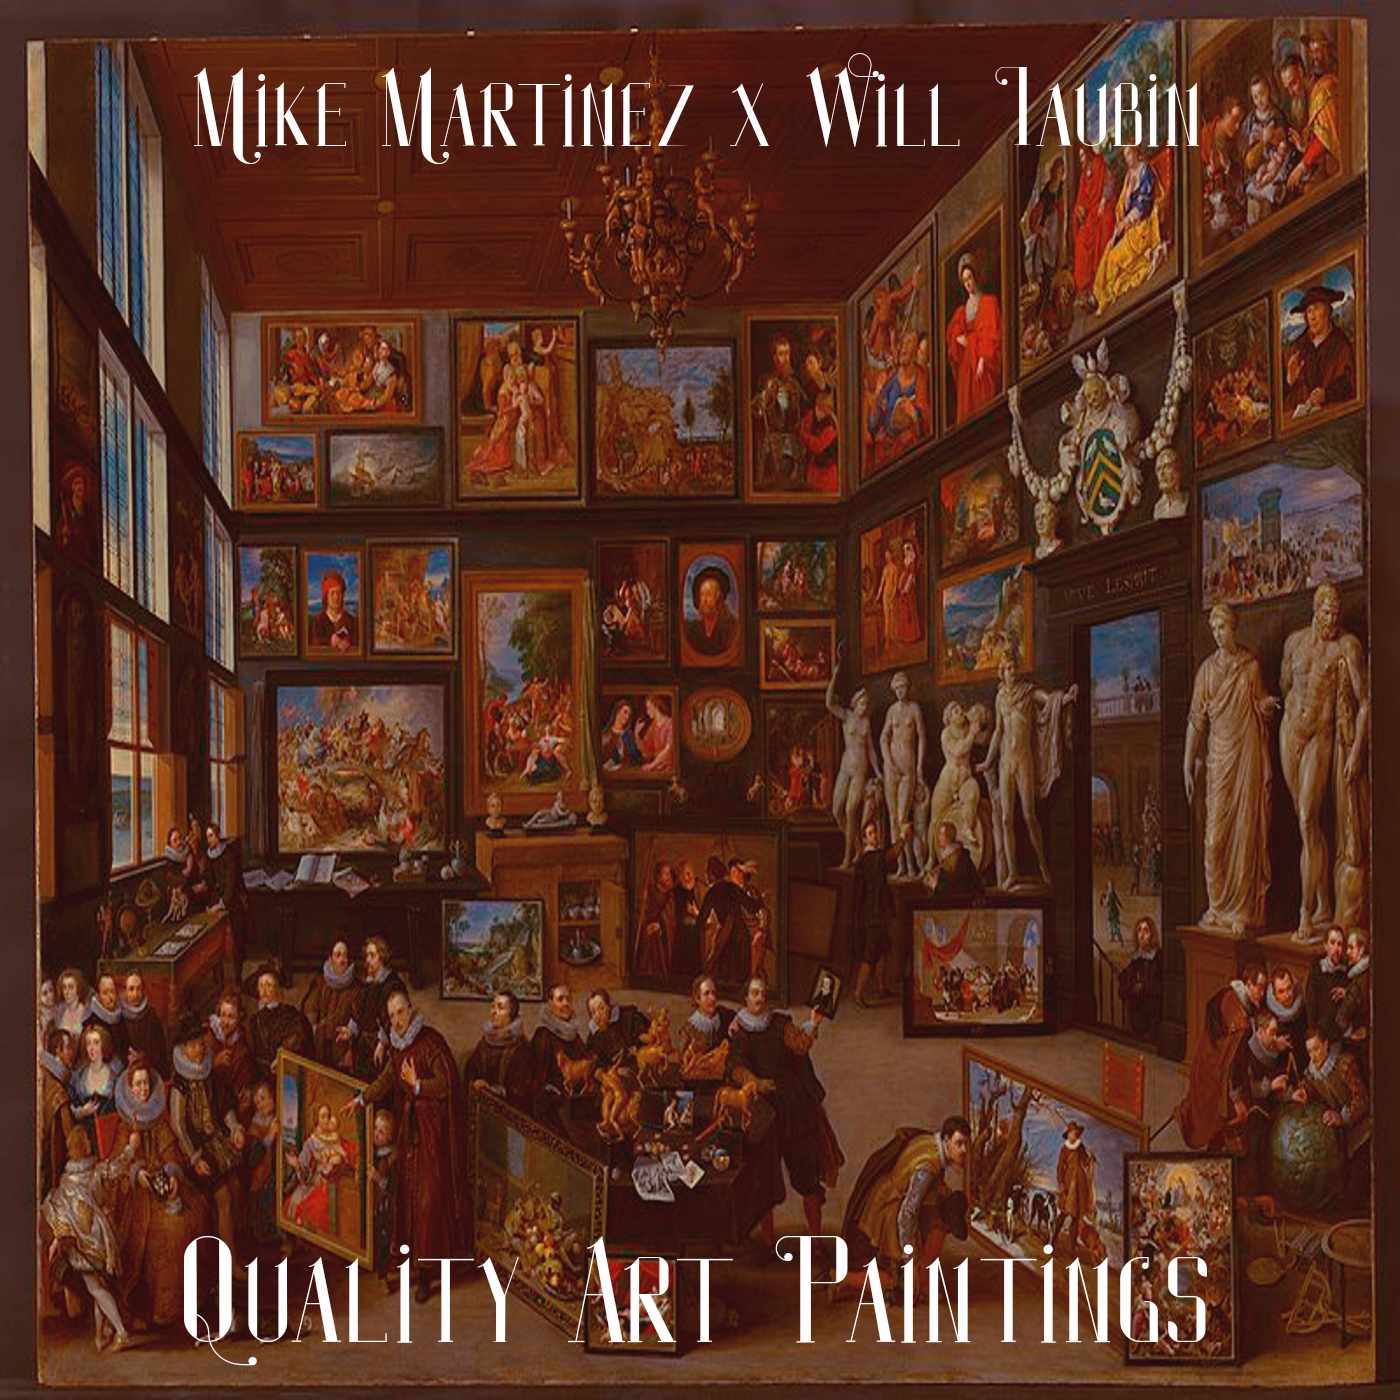 Mike Martinez & Will Taubin Share Their 'Quality Art Paintings'